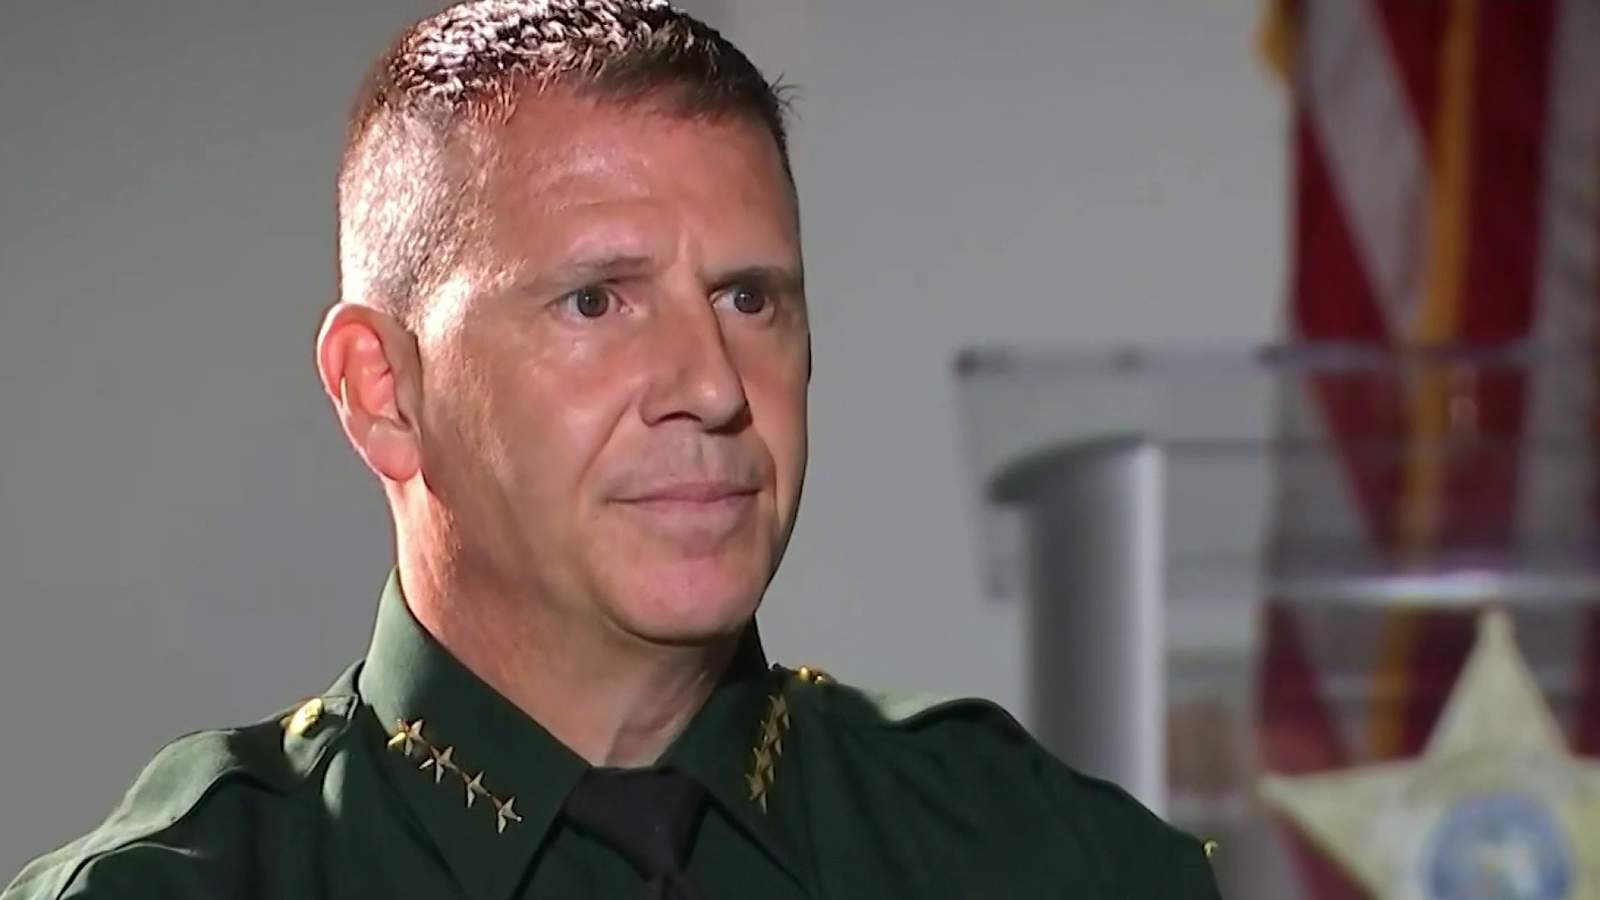 Sheriff John Mina considering policy changes after Salaythis Melvin shooting